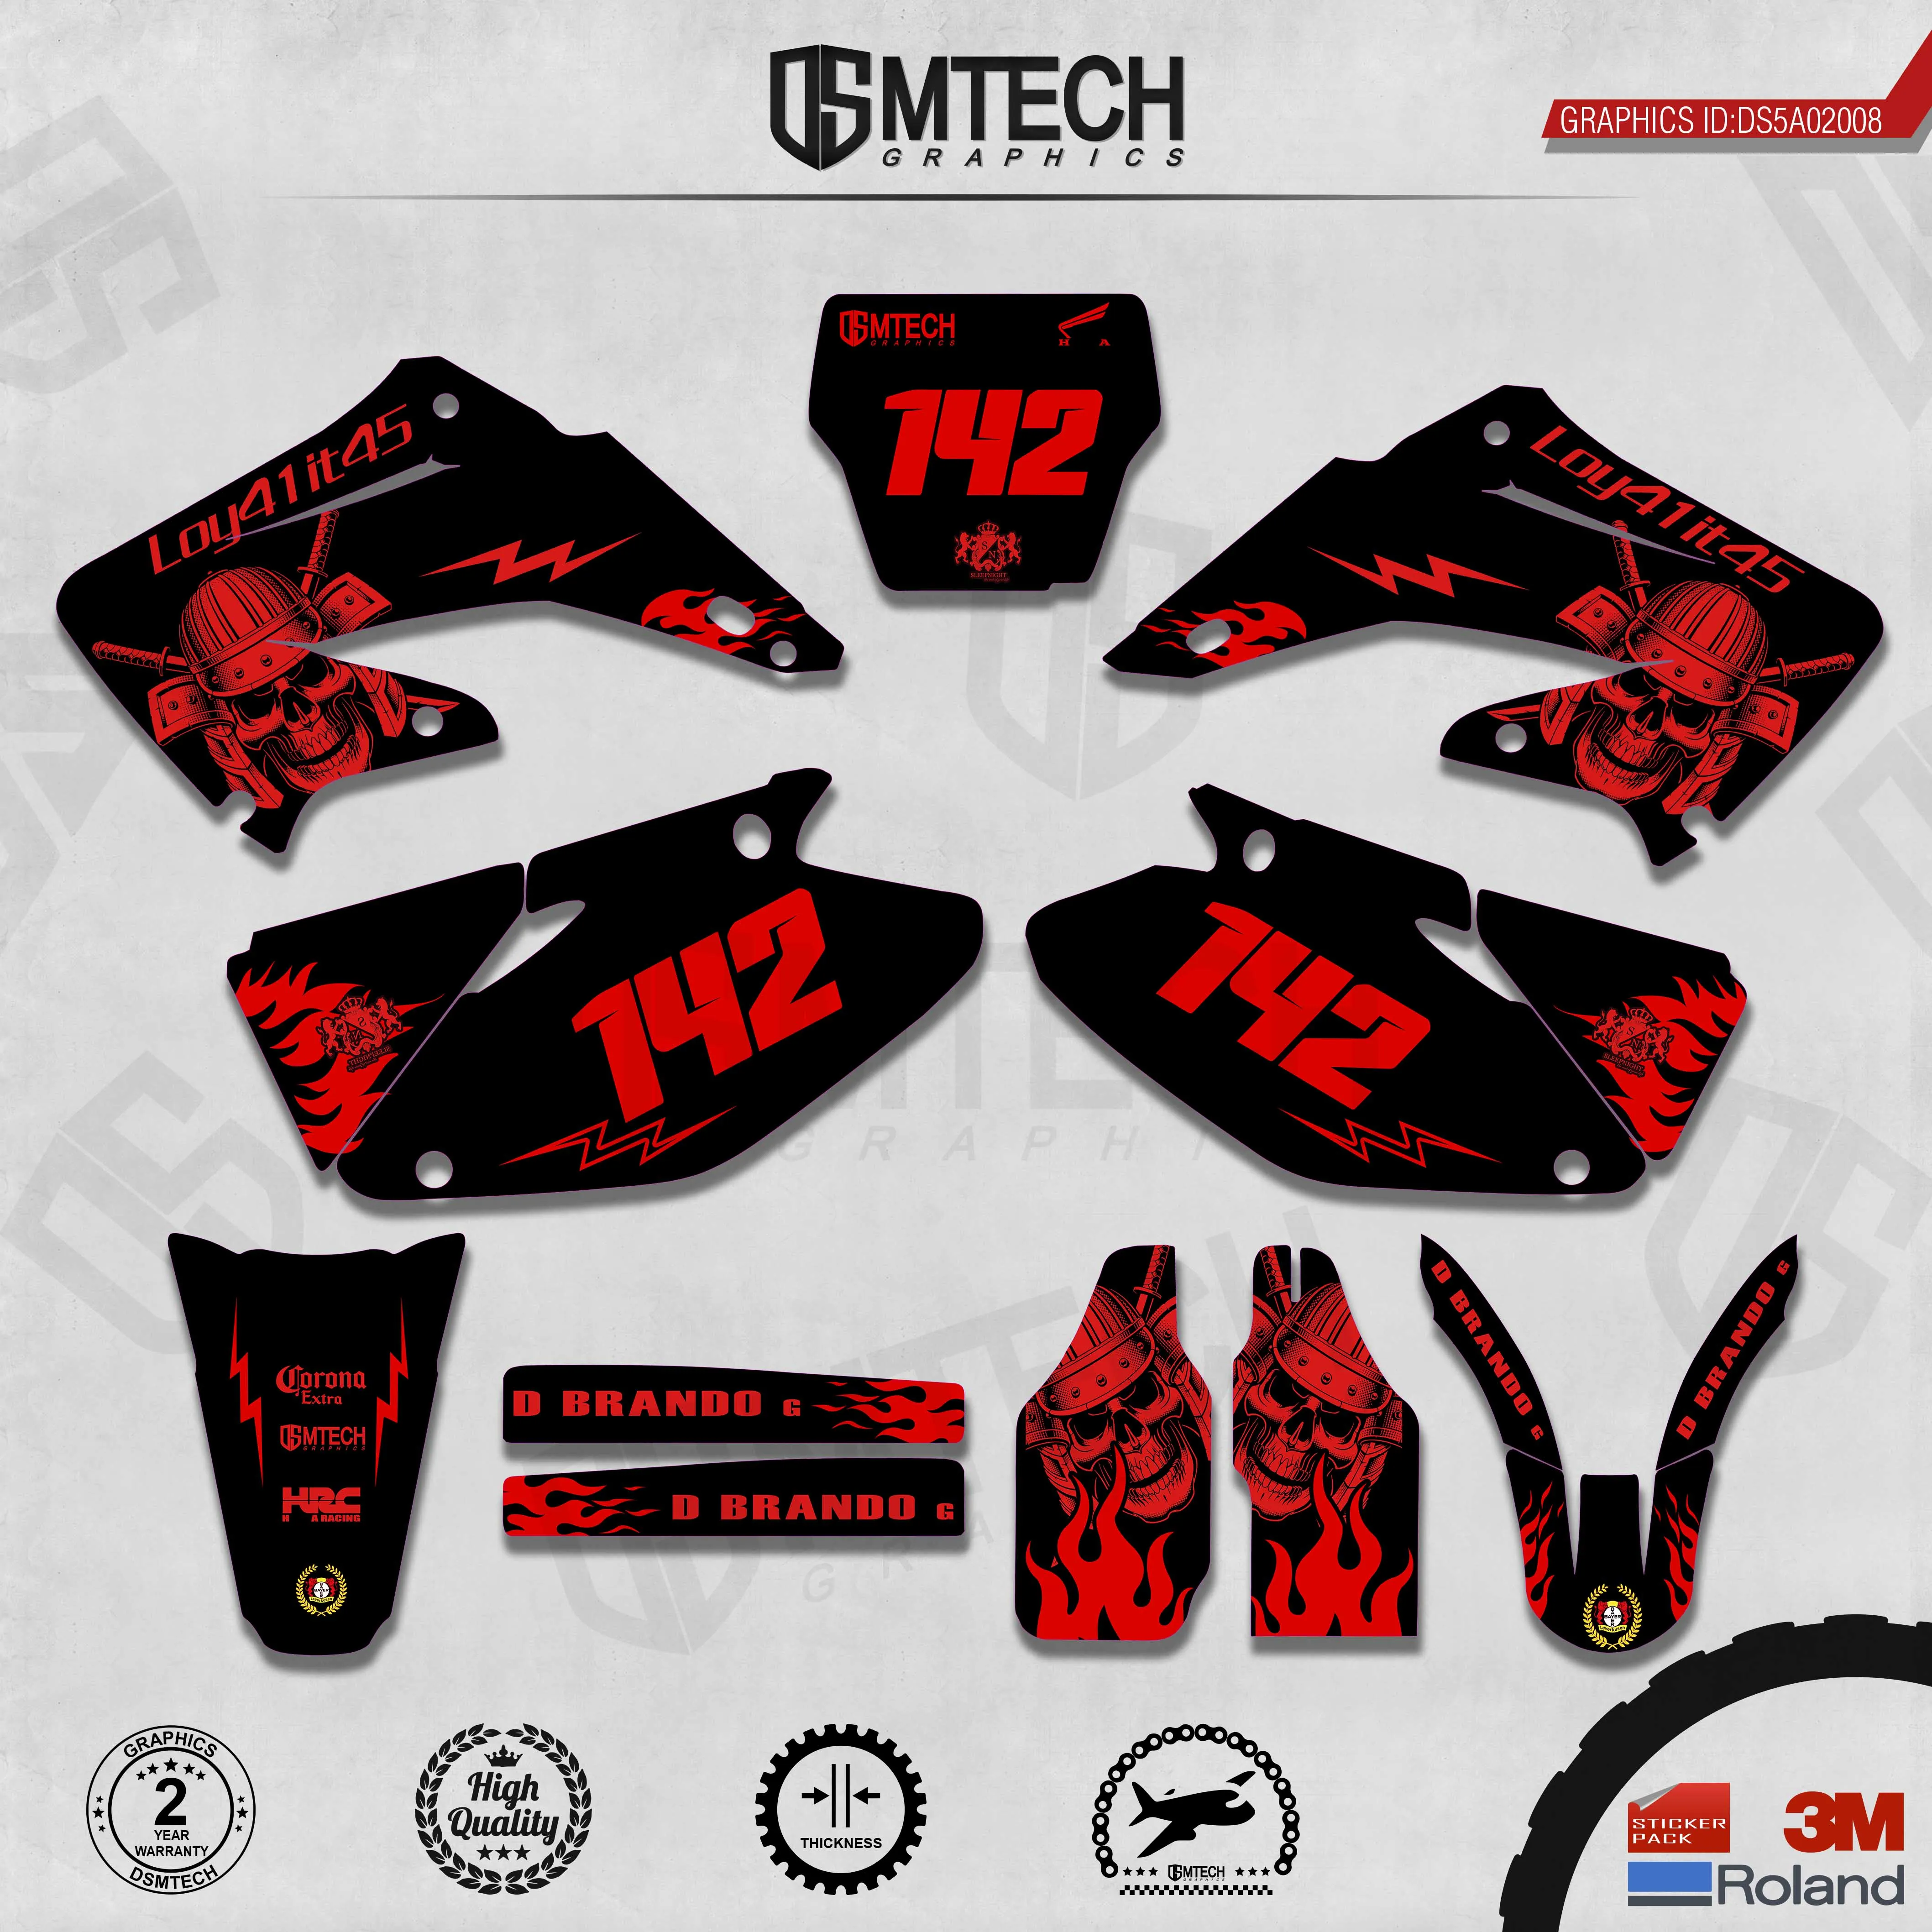 DSMTECH Customized Team Graphics Backgrounds Decals 3M Custom Stickers For 2002-2004 2005-2007 2008-2010 2011-2012 CR125-250 008